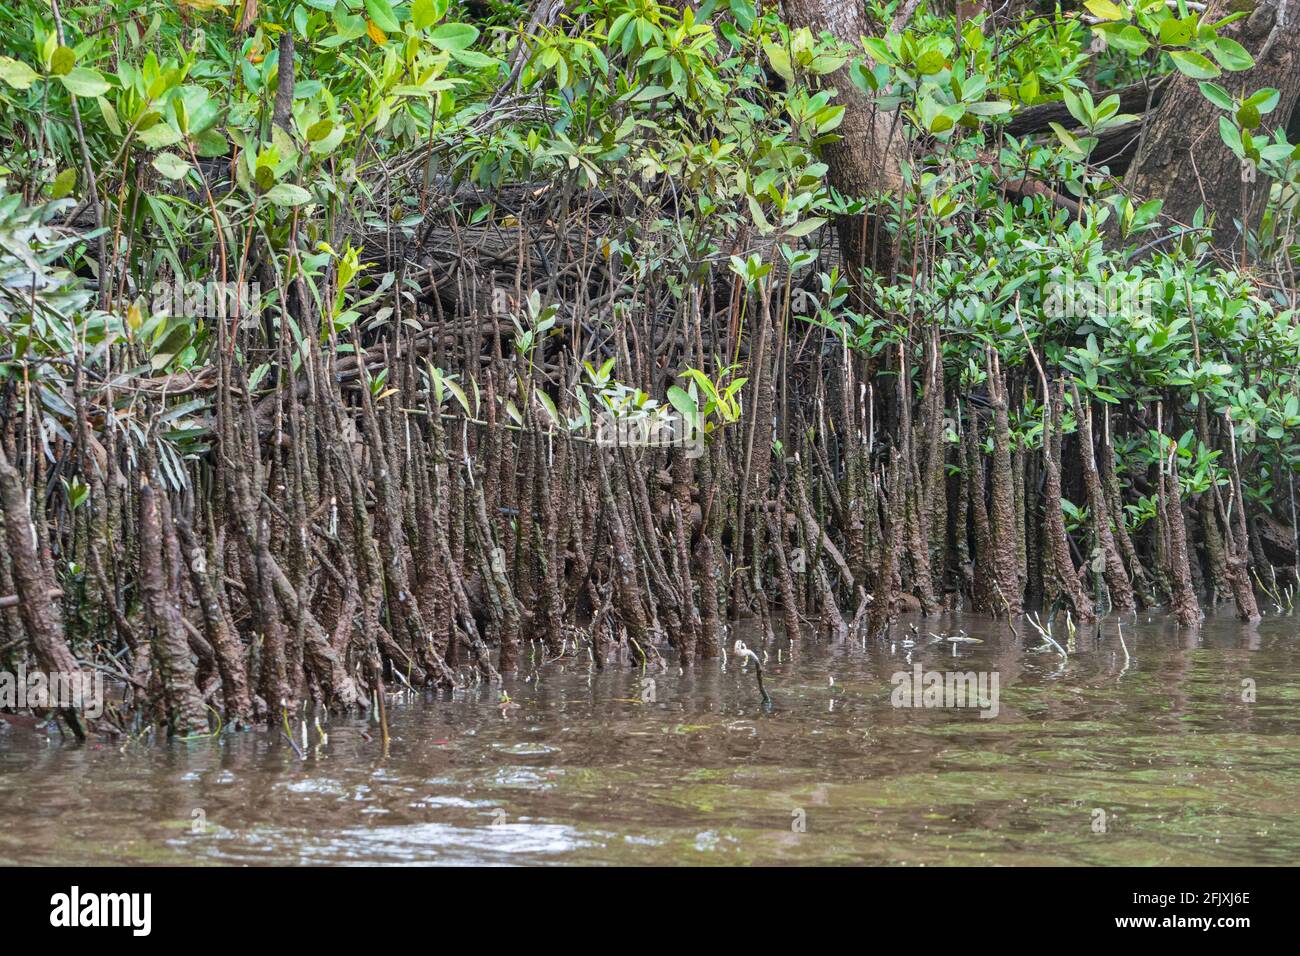 Exposed roots of a mangrove forest, Daintree National Park, Far North Queensland, FNQ, QLD, Australia Stock Photo